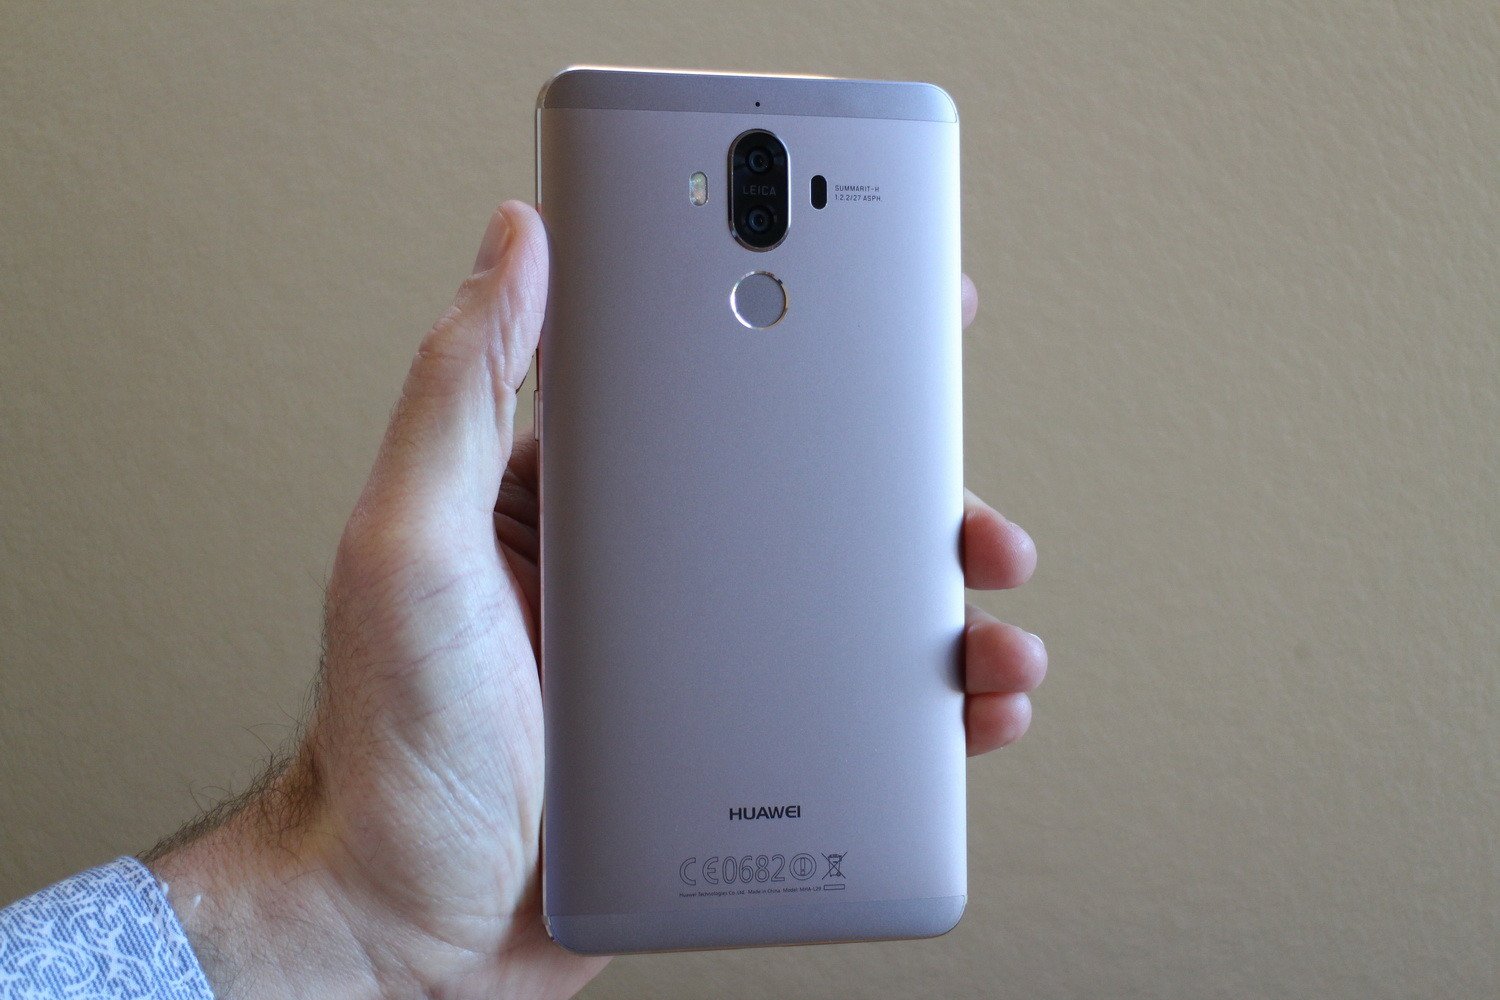 top best features of Huawei Mate 9